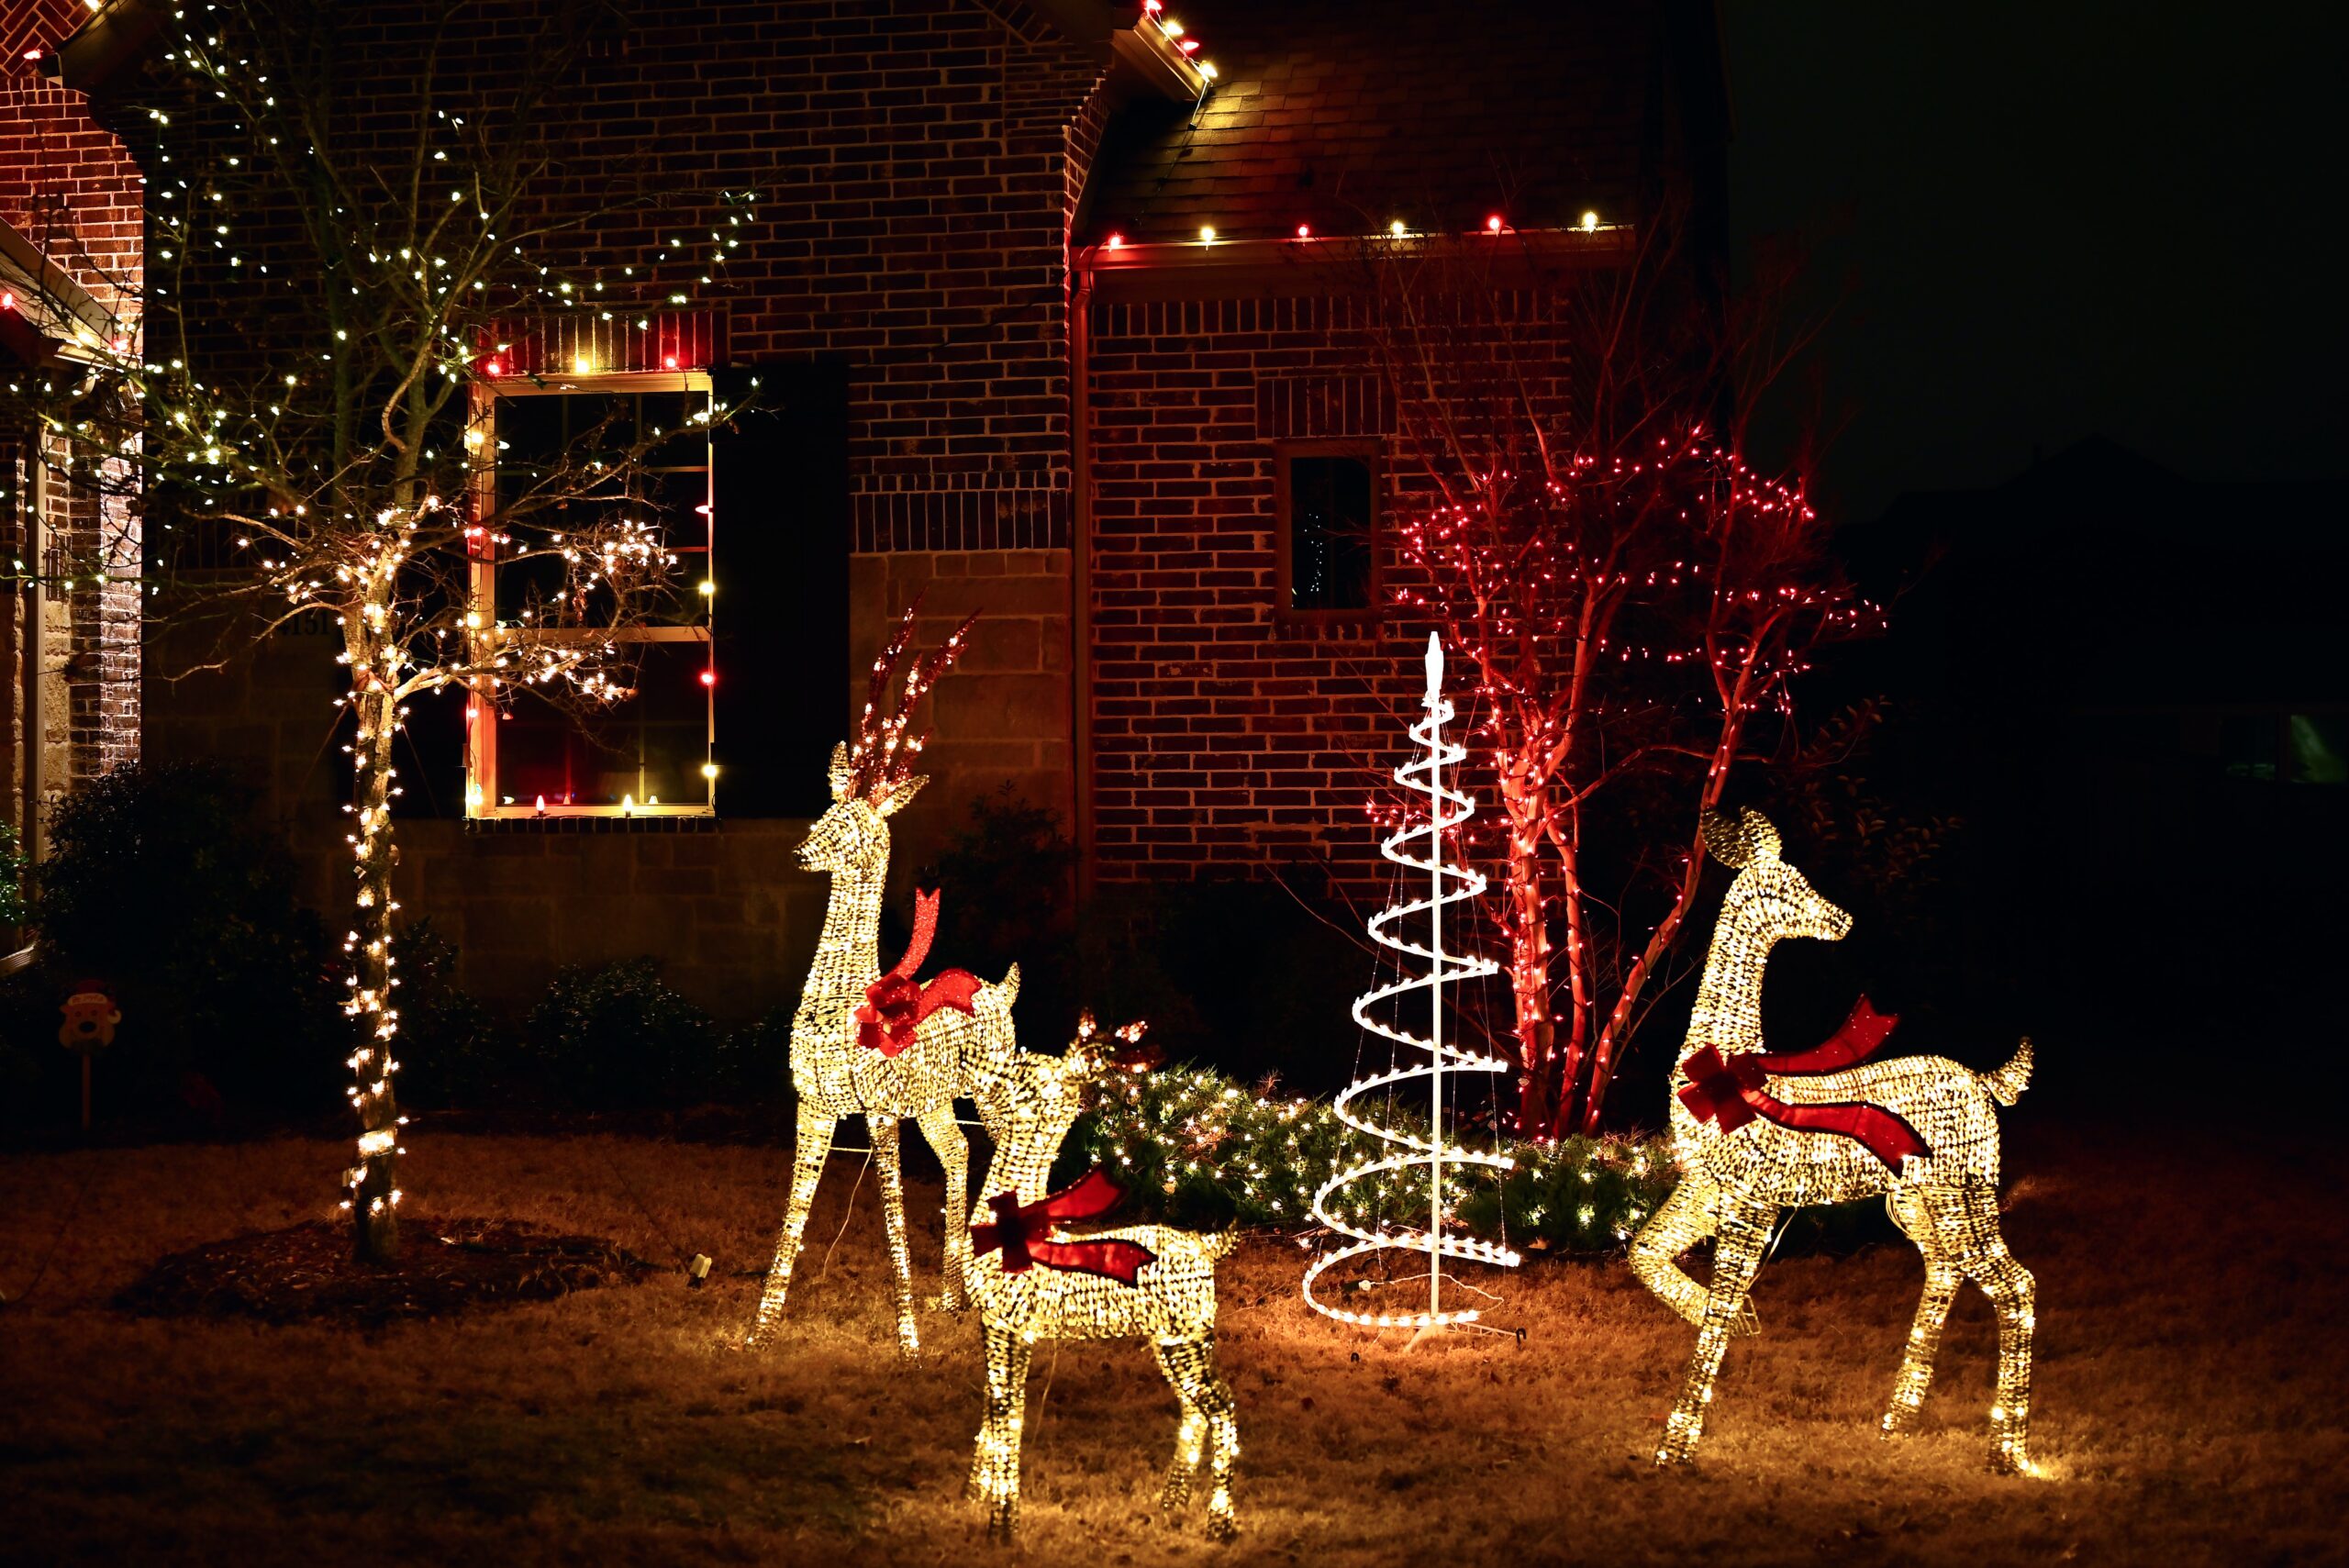 Add deer for a sparkling effect on your yard with this outdoor tree lighting idea. Pictured: Outdoor Deer lights with Holiday decorations. 